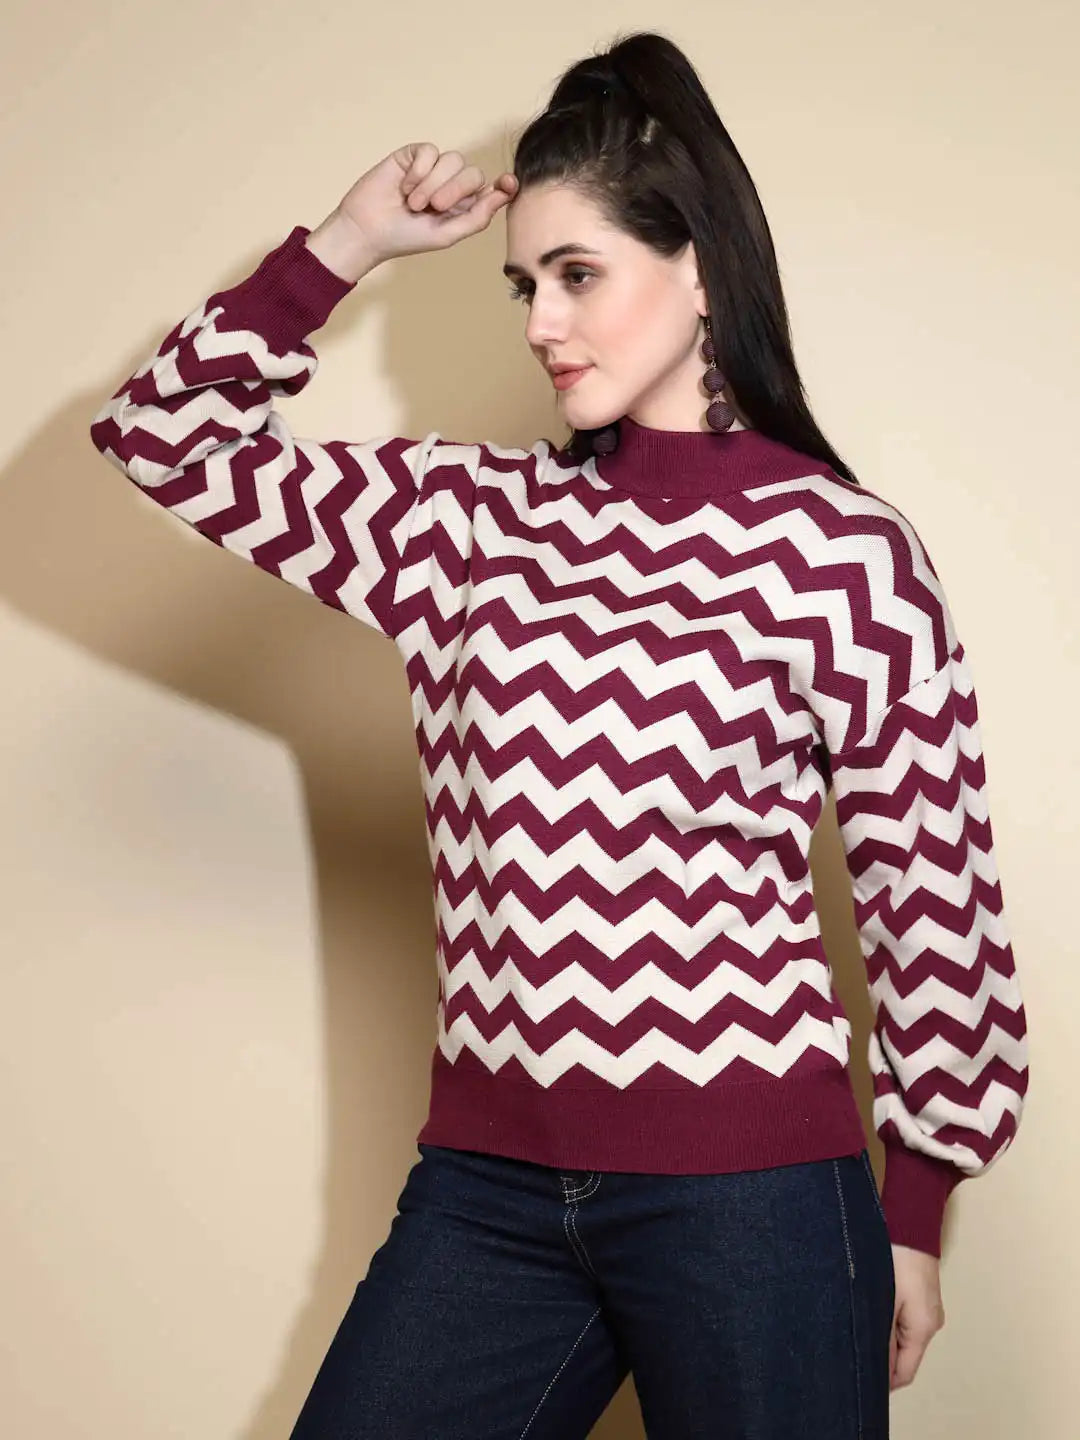 Mulberry Geometric print Full Sleeve High Neck Acrylic Pullover Sweater